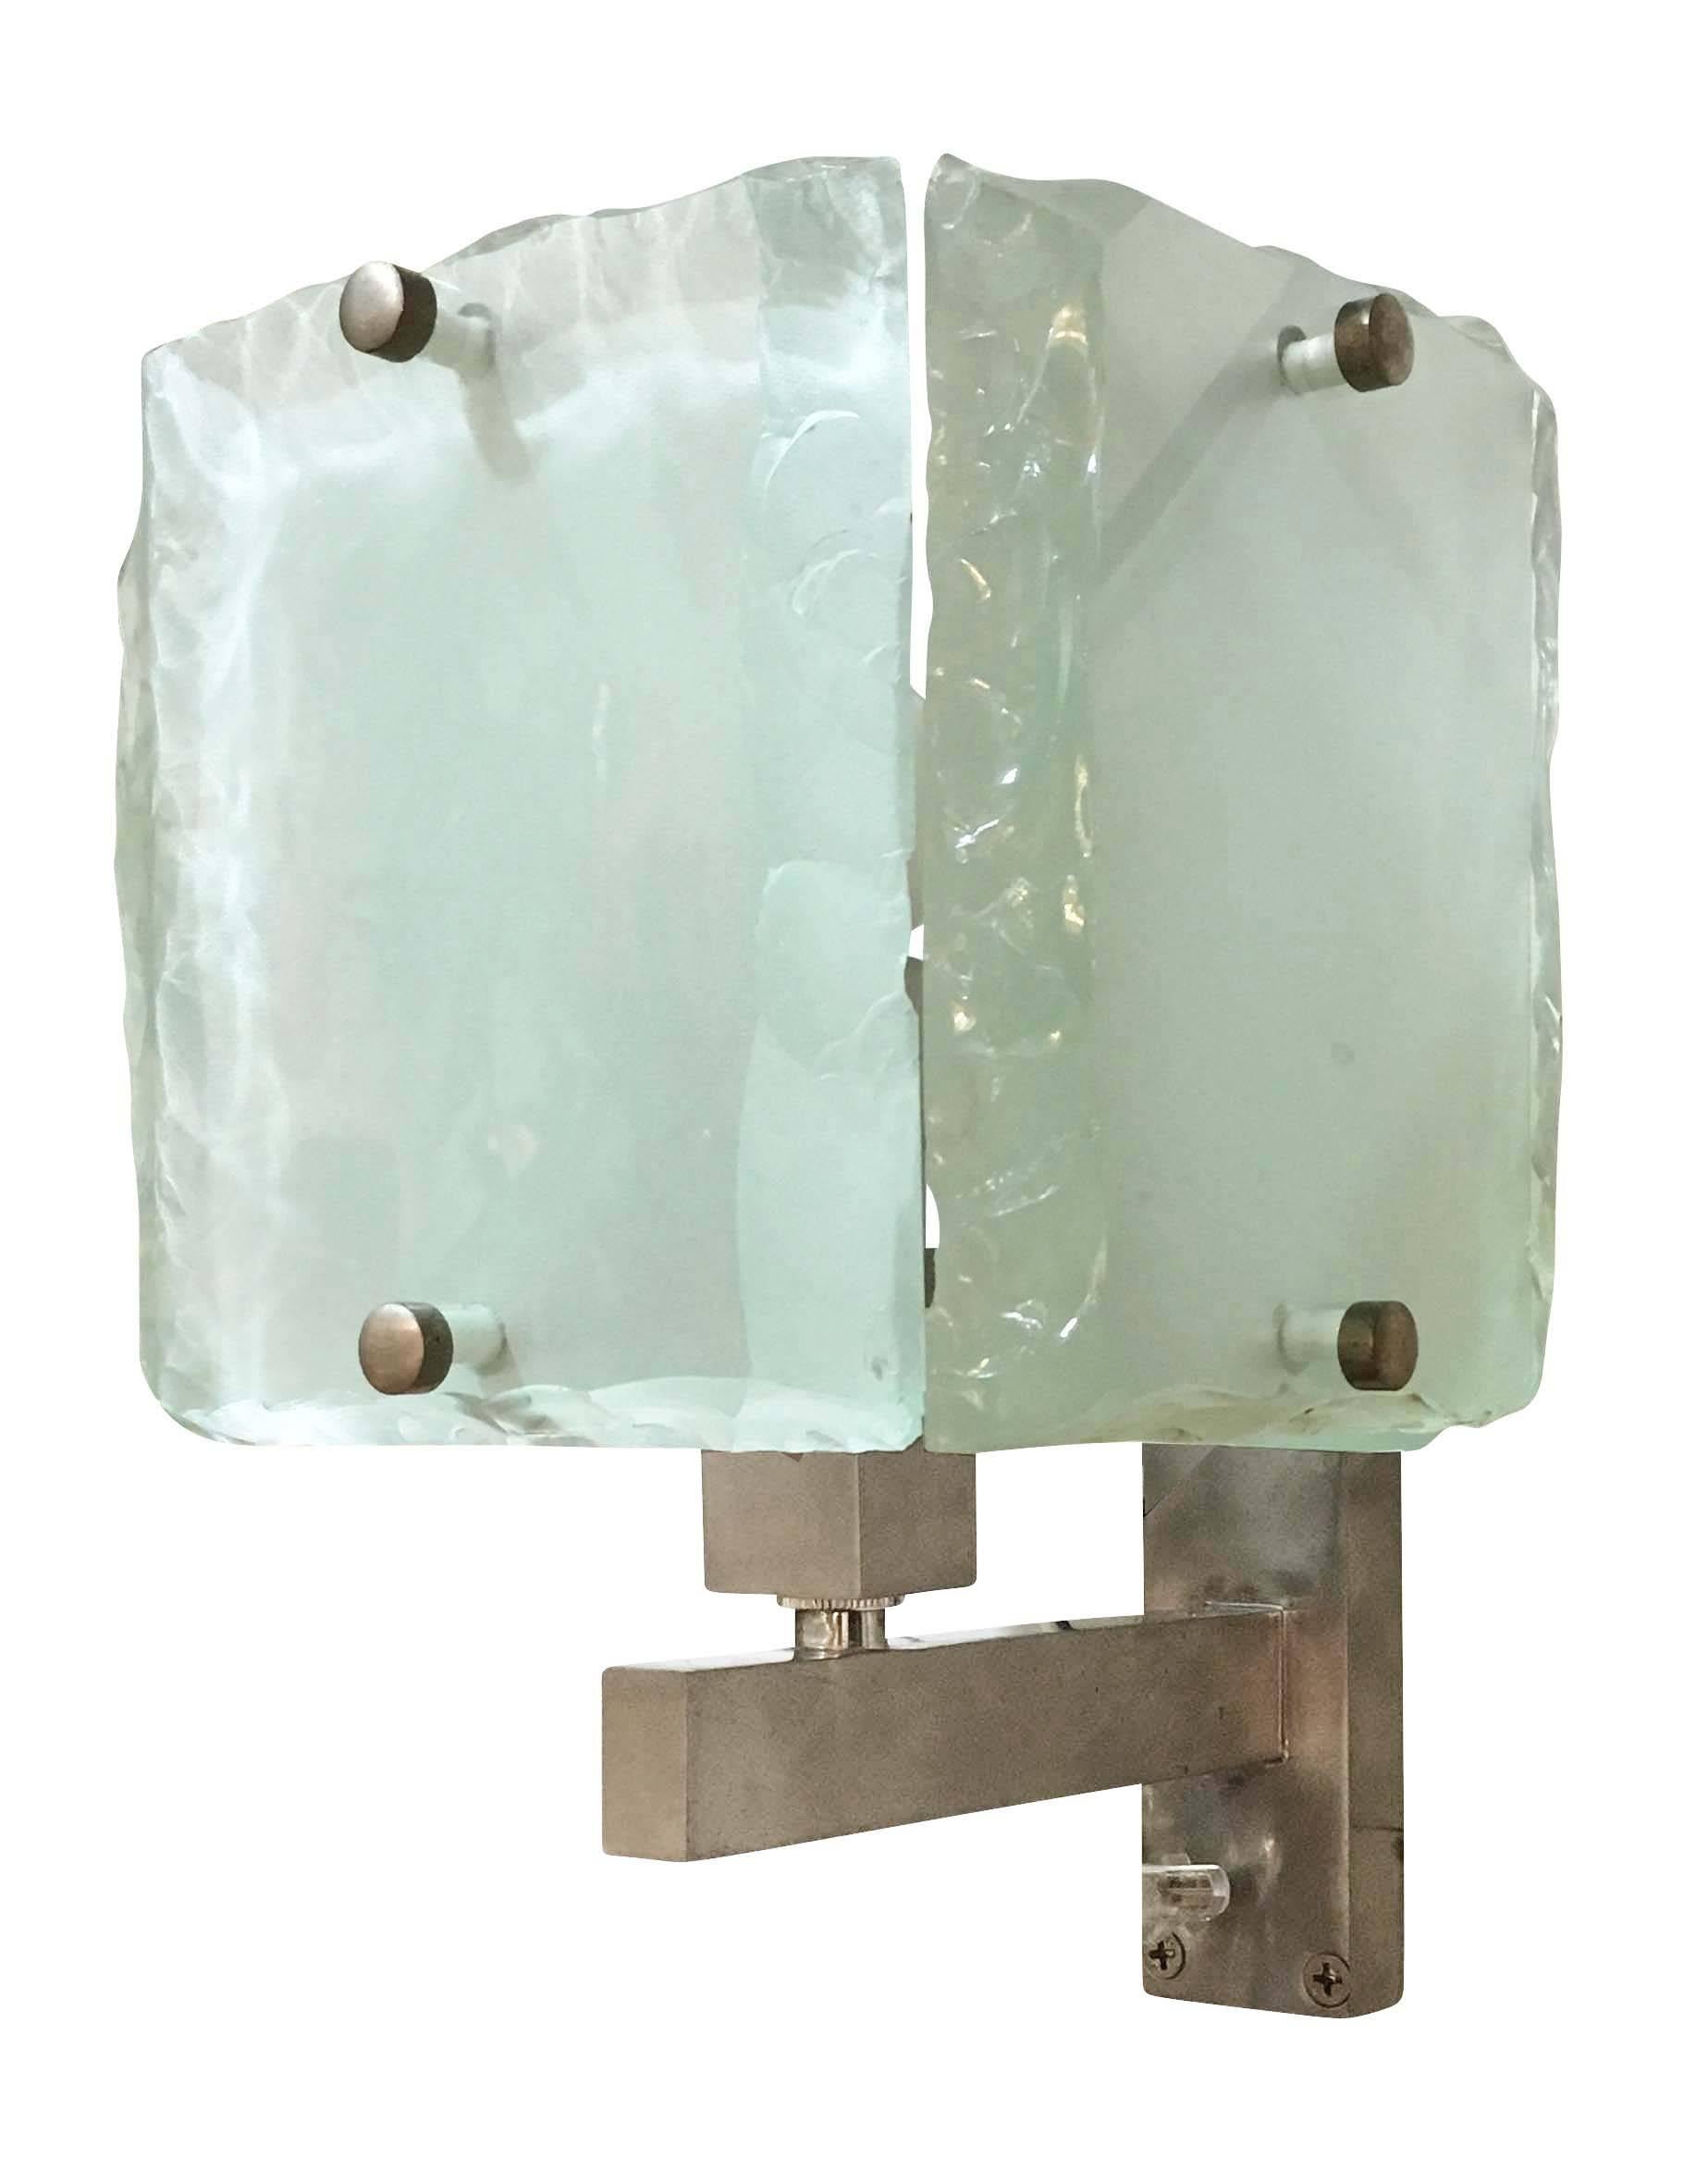 Italian midcentury sconces by ZeroQuattro each composed of four hand chiselled glass slabs which are polished on the exterior and frosted on the interior. The glasses are mounted on brushed nickel frame holding on candelabra socket. Can be mounted